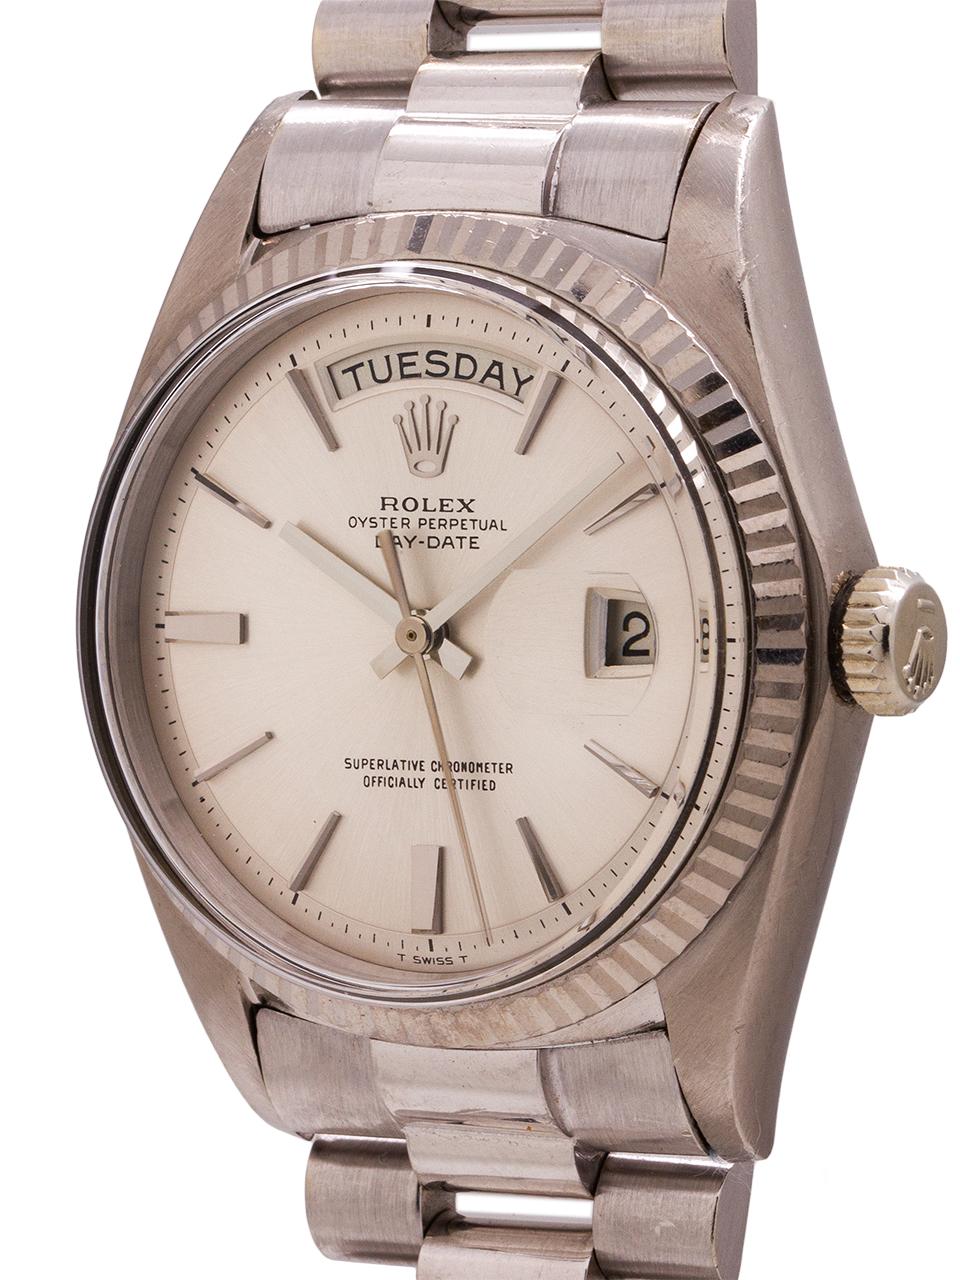 Vintage Rolex Day Date President ref 1803 serial no 5.1 million circa 1977. Featuring 36mm diameter case with fluted bezel and acrylic crystal. This example features a robust case with very heavy lugs that have not been over polished. A well